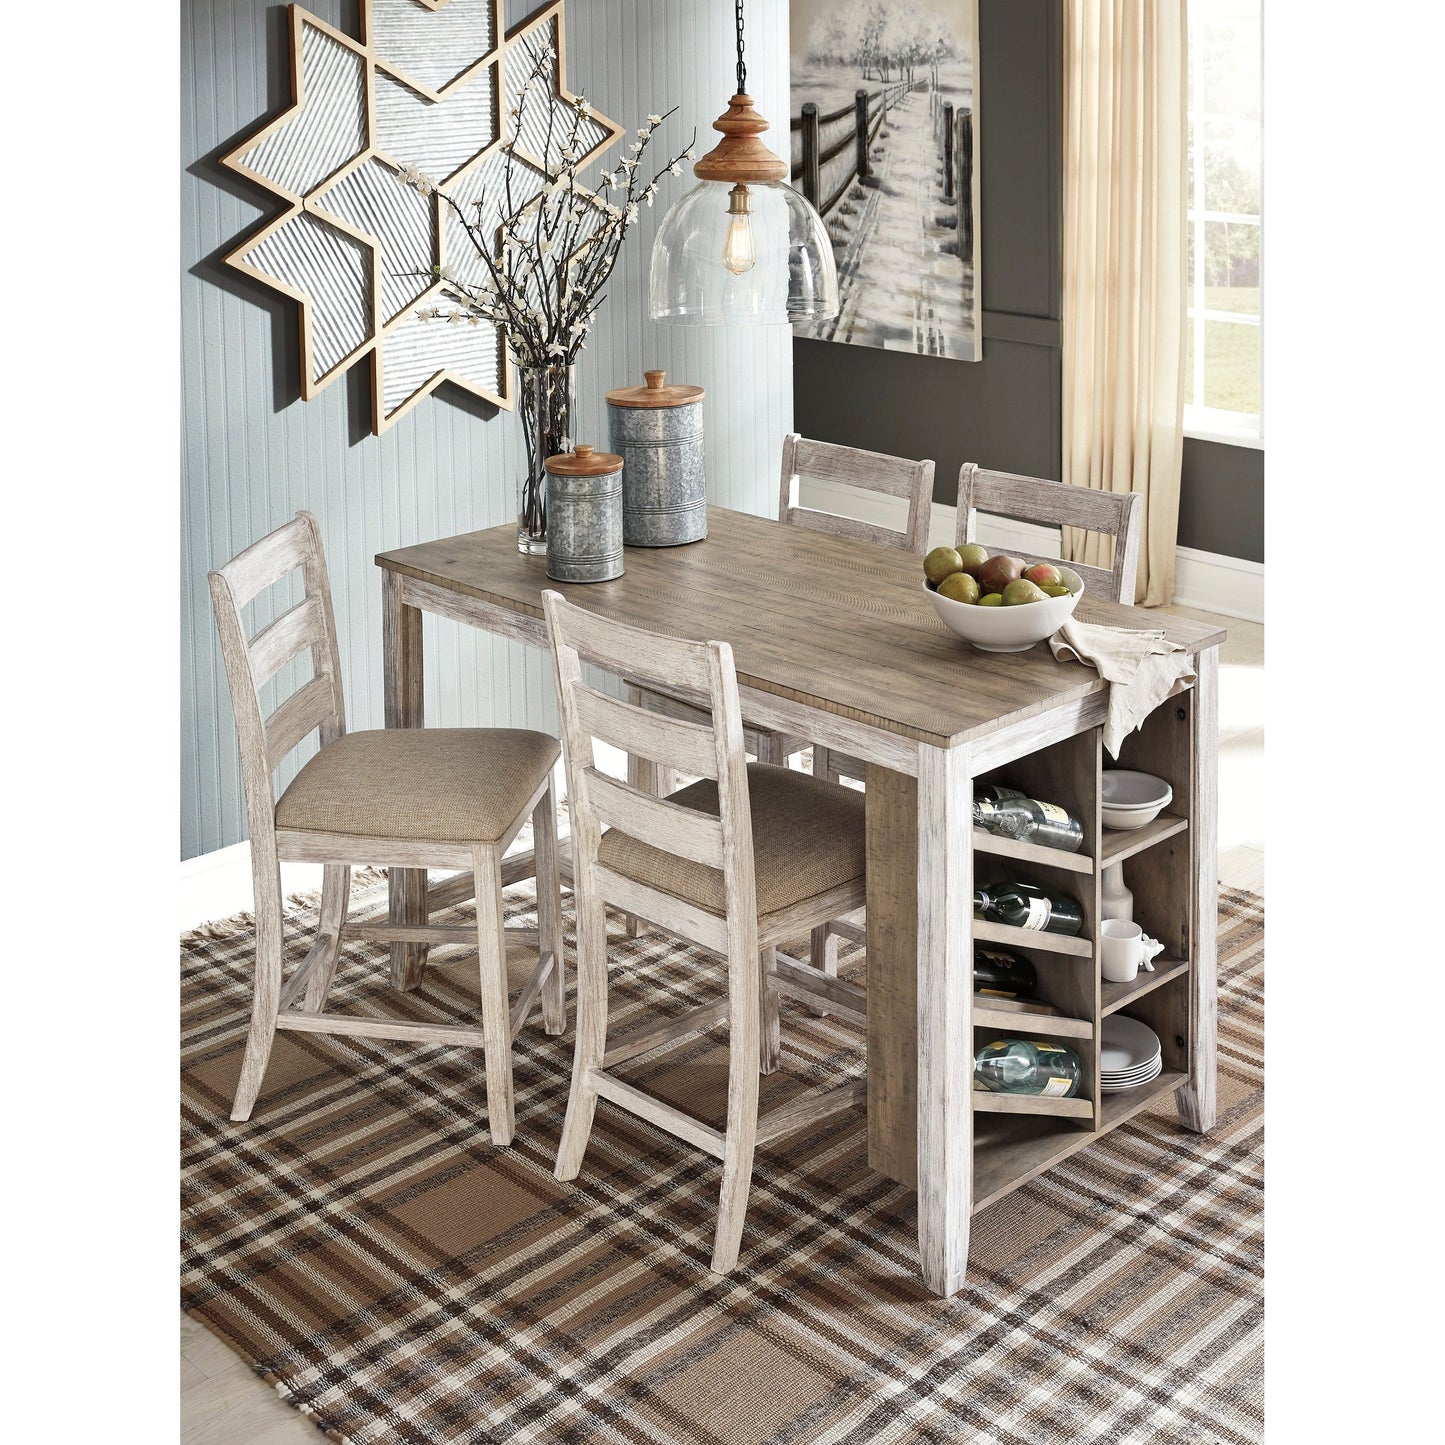 SKEMPTON COUNTER HEIGHT DINING TABLE WITH 4 COUNTER BARSTOOLS